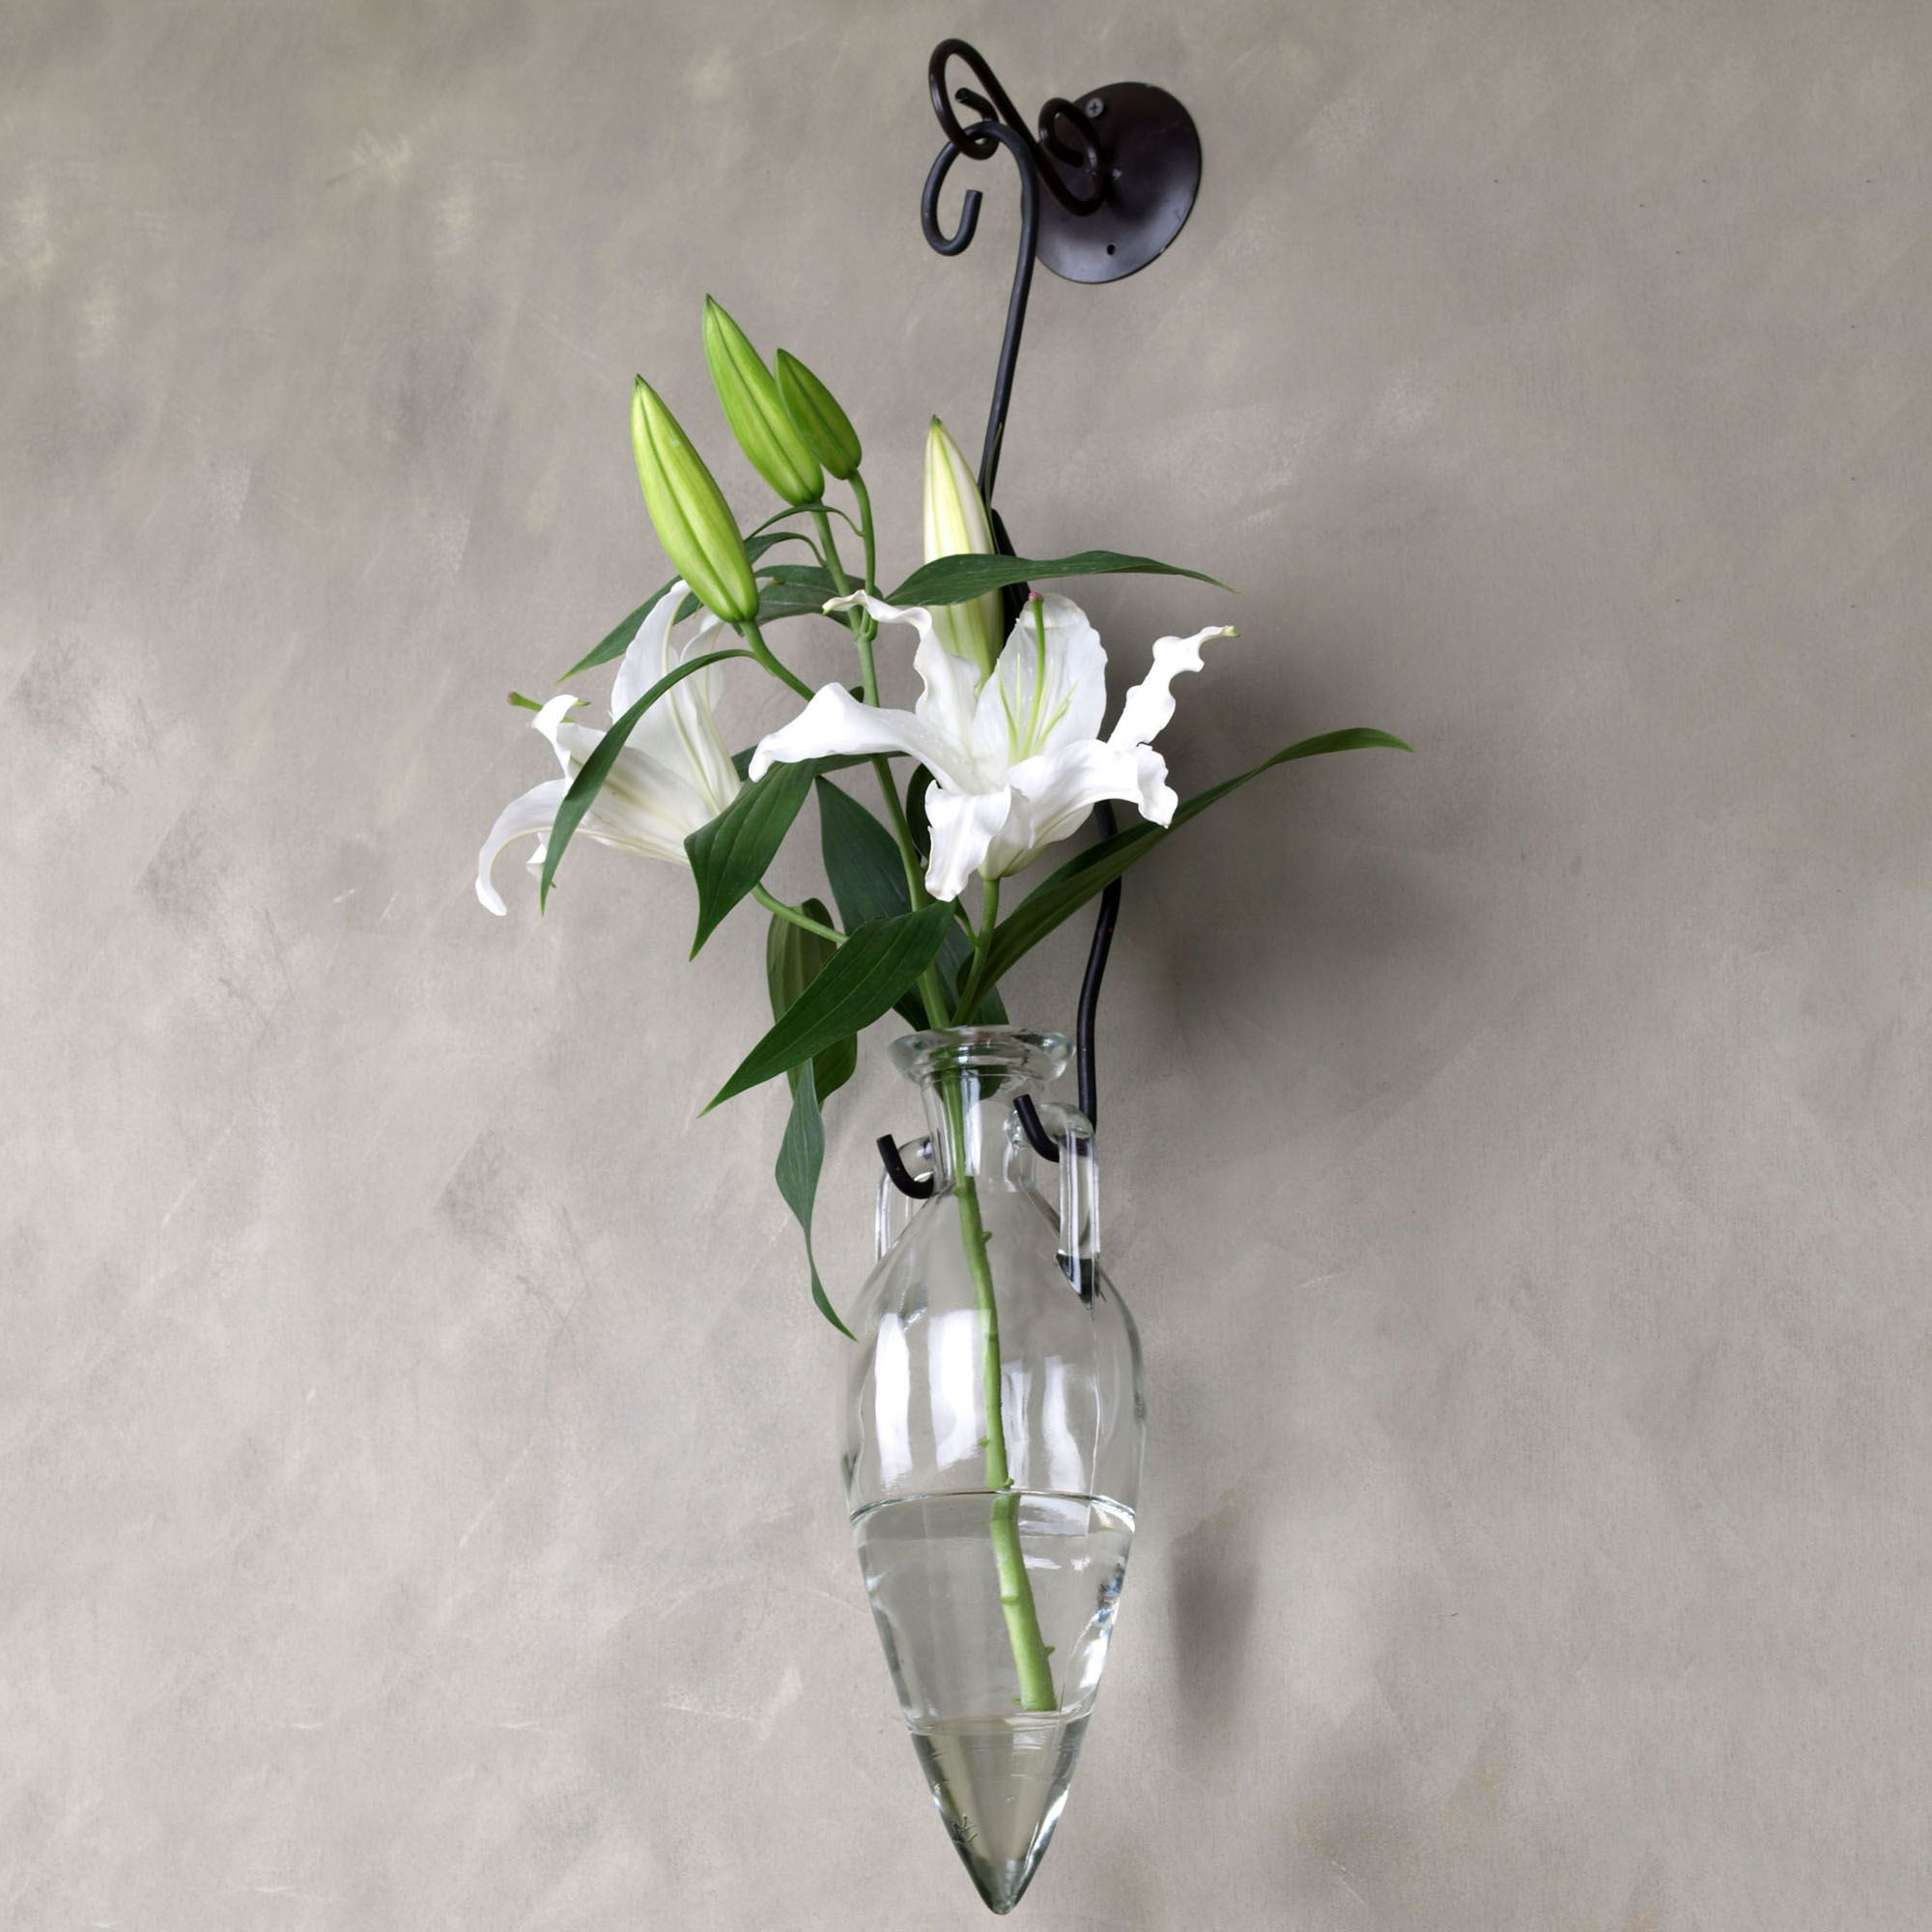 18 Recommended Vase Water Fountain 2024 free download vase water fountain of metal flower vase photograph h vases wall hanging flower vase in h vases wall hanging flower vase newspaper i 0d scheme wall scheme